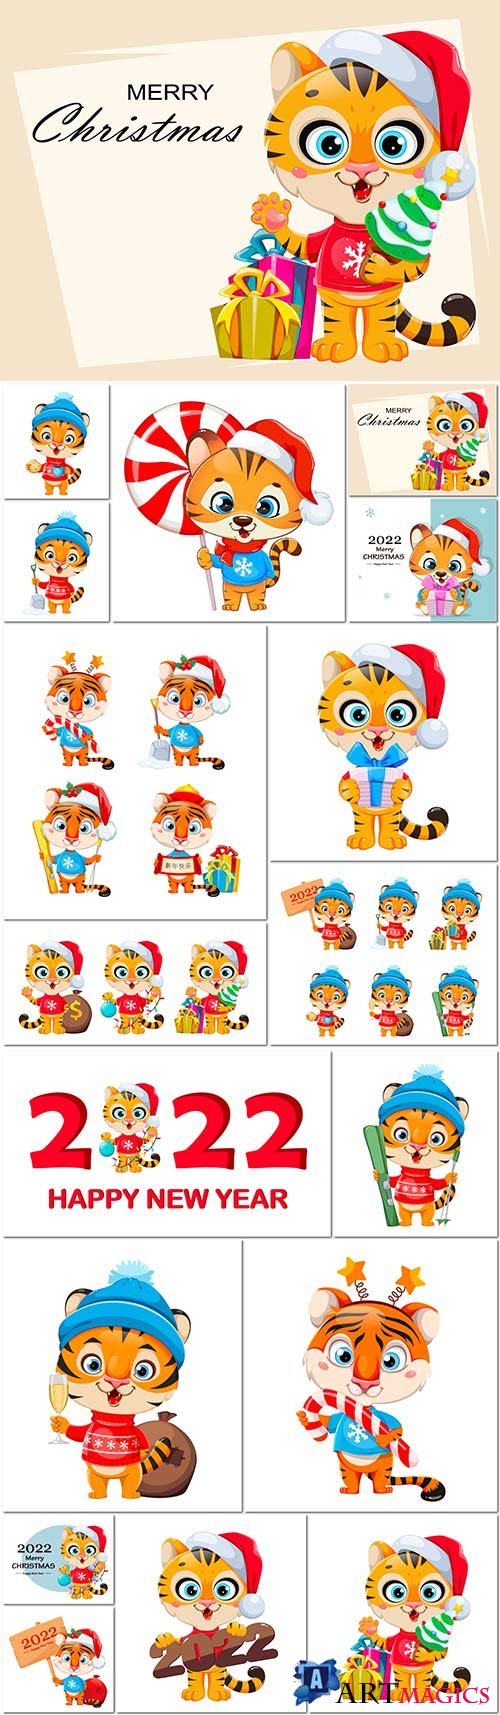 Merry christmas, cute tiger in santa hat holding 2022 sign, vector illustration